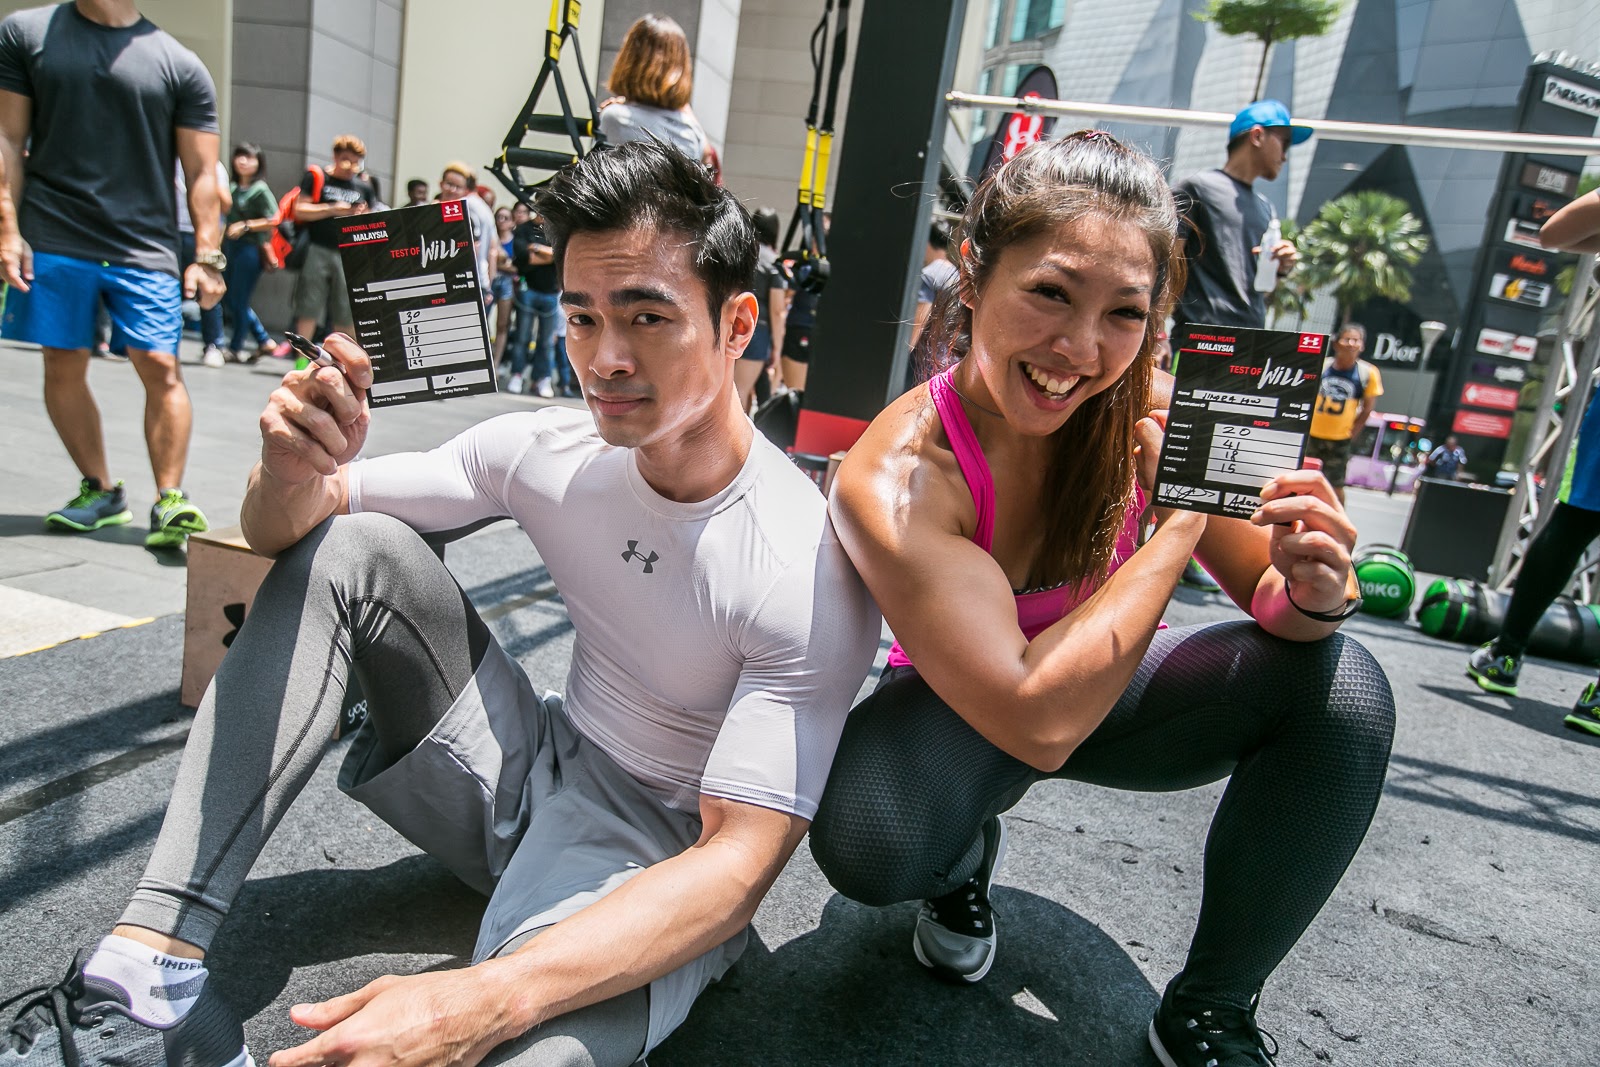 Under Armour brand ambassadors, Kit Mah and Linora Low completed the Test of Will 2017 4-minute circuit challenge with flying colours.